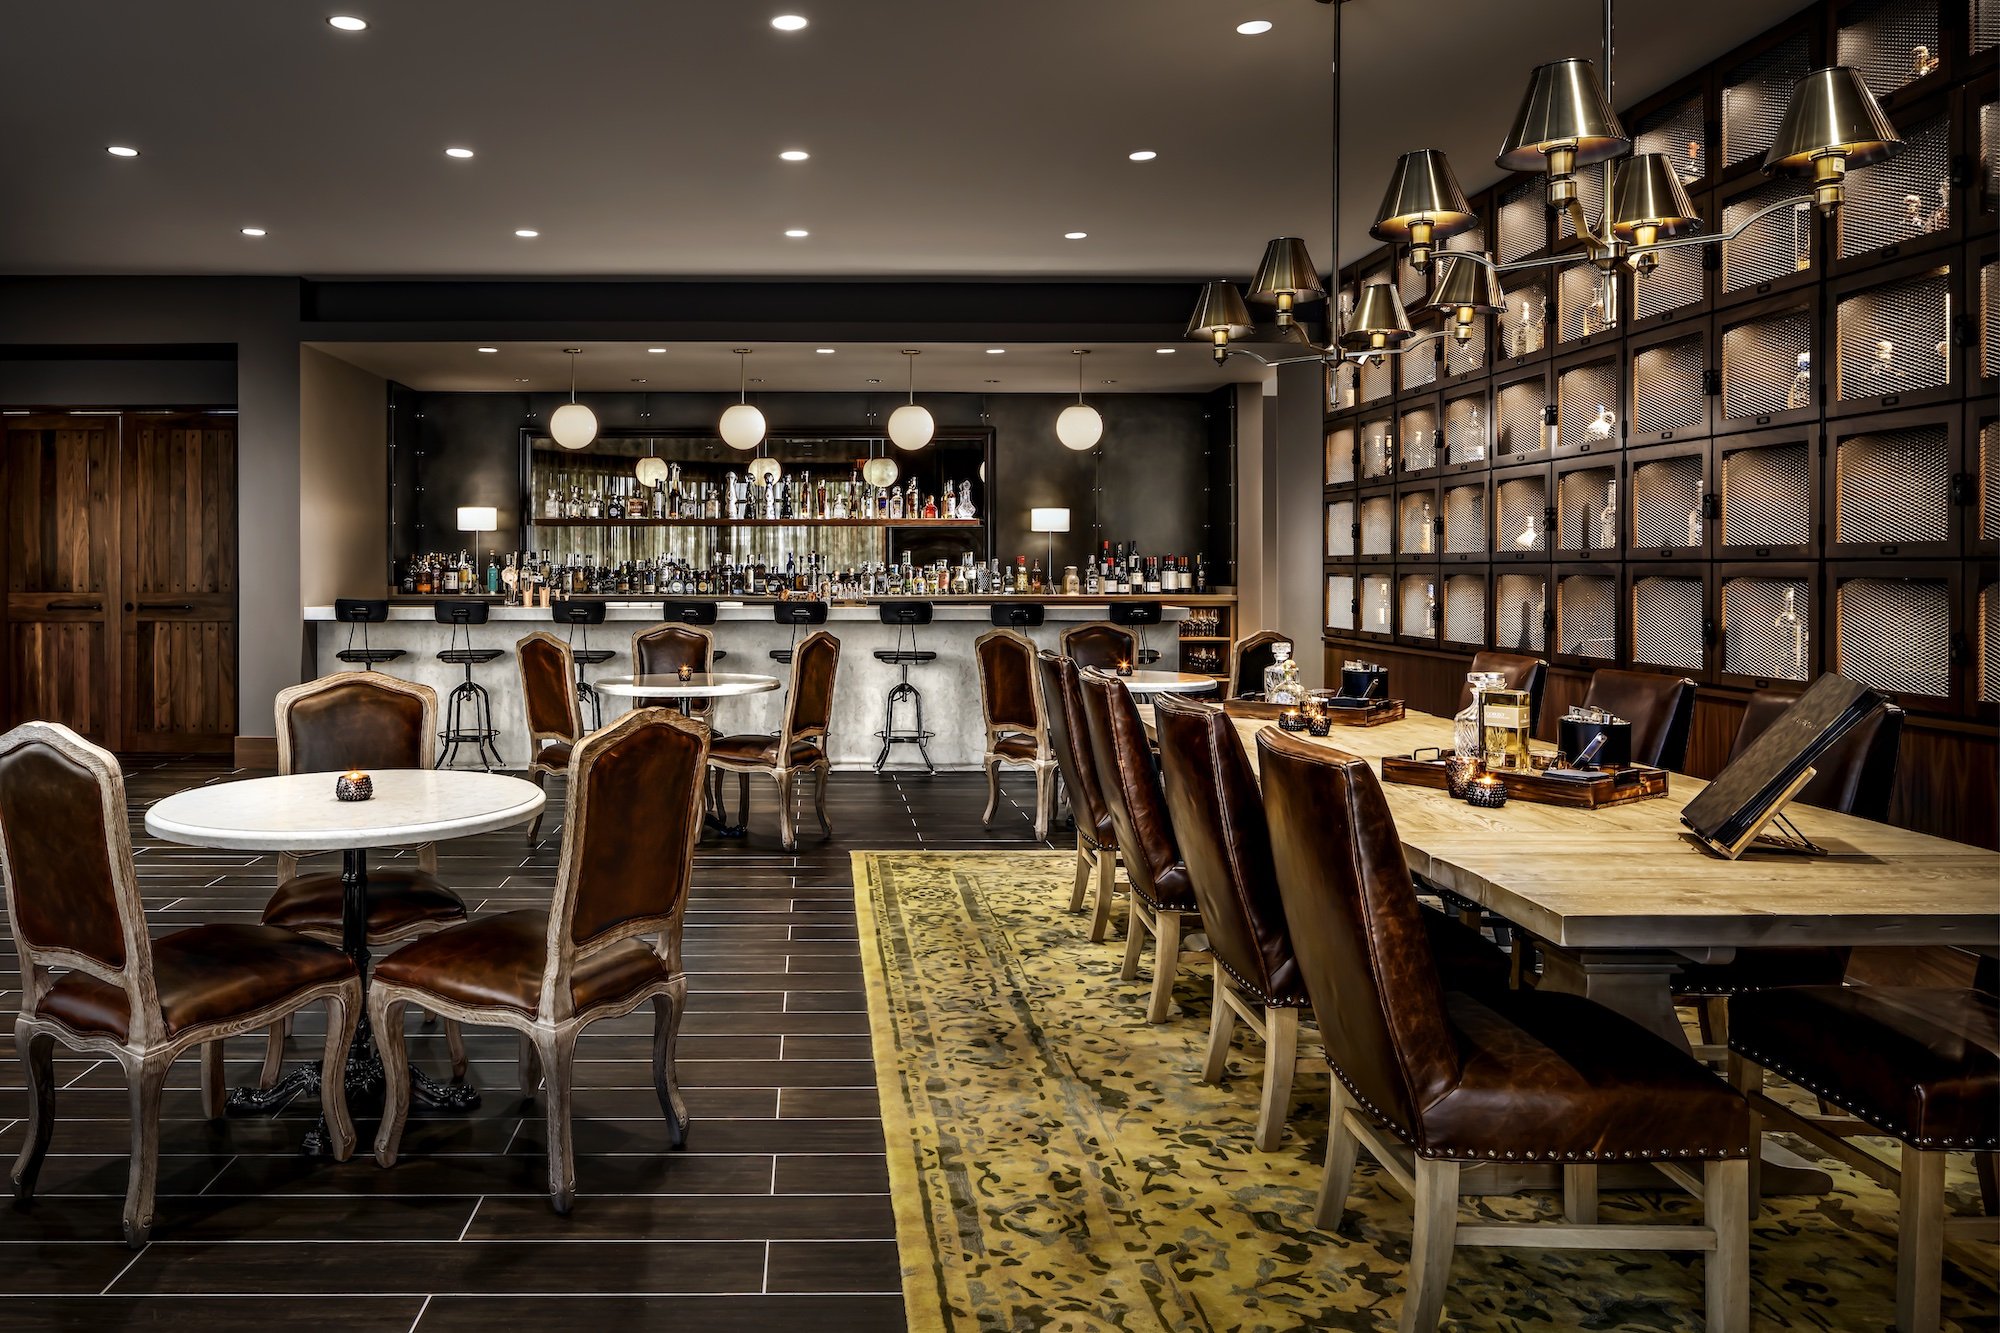 Louis Vuitton ventures into F&B with a gorgeous cafe that offers